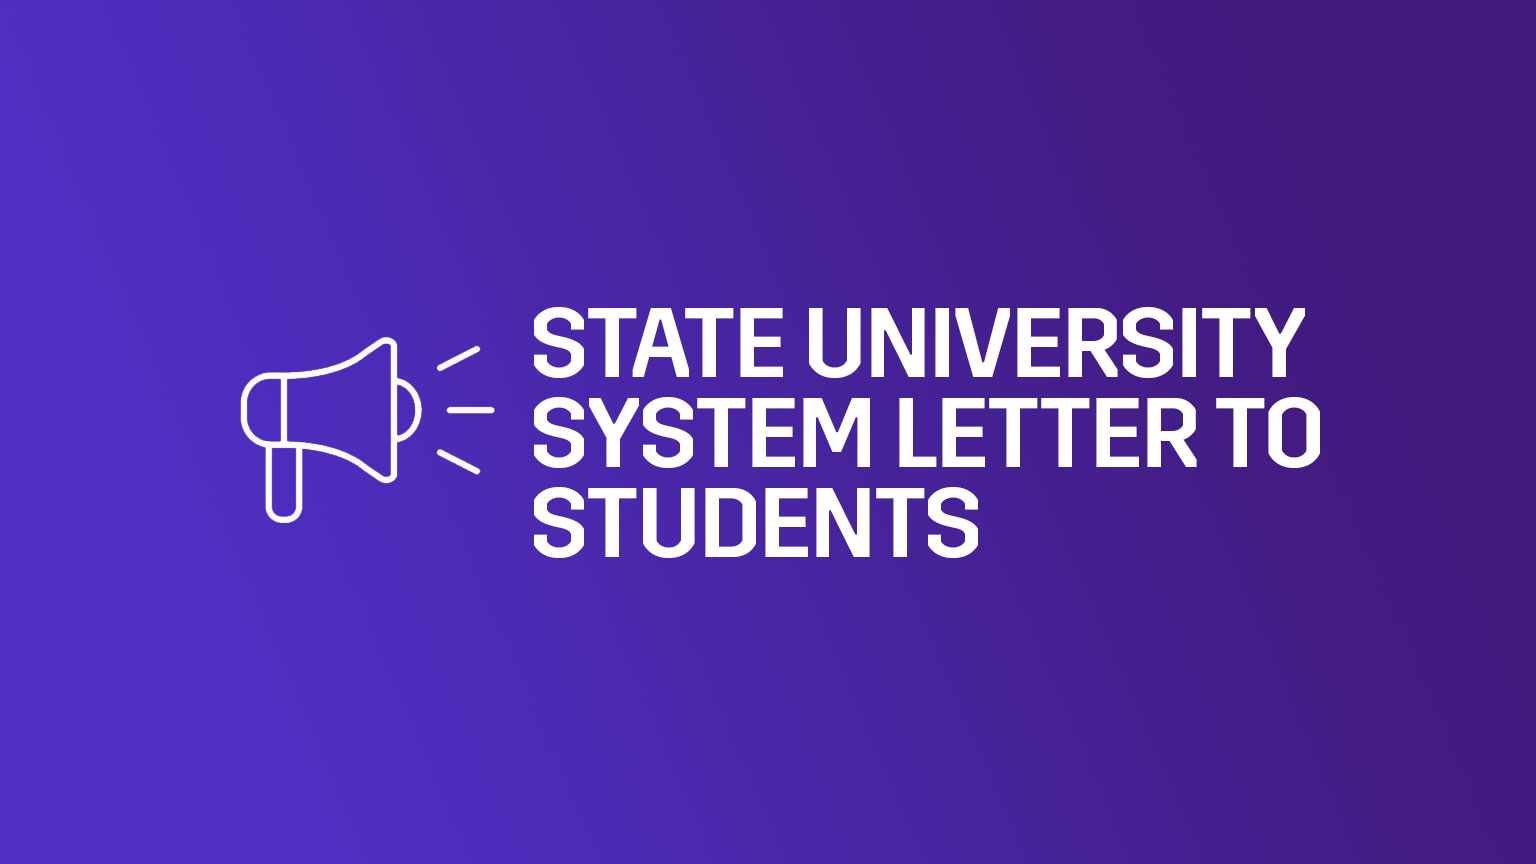 State University System letter to students